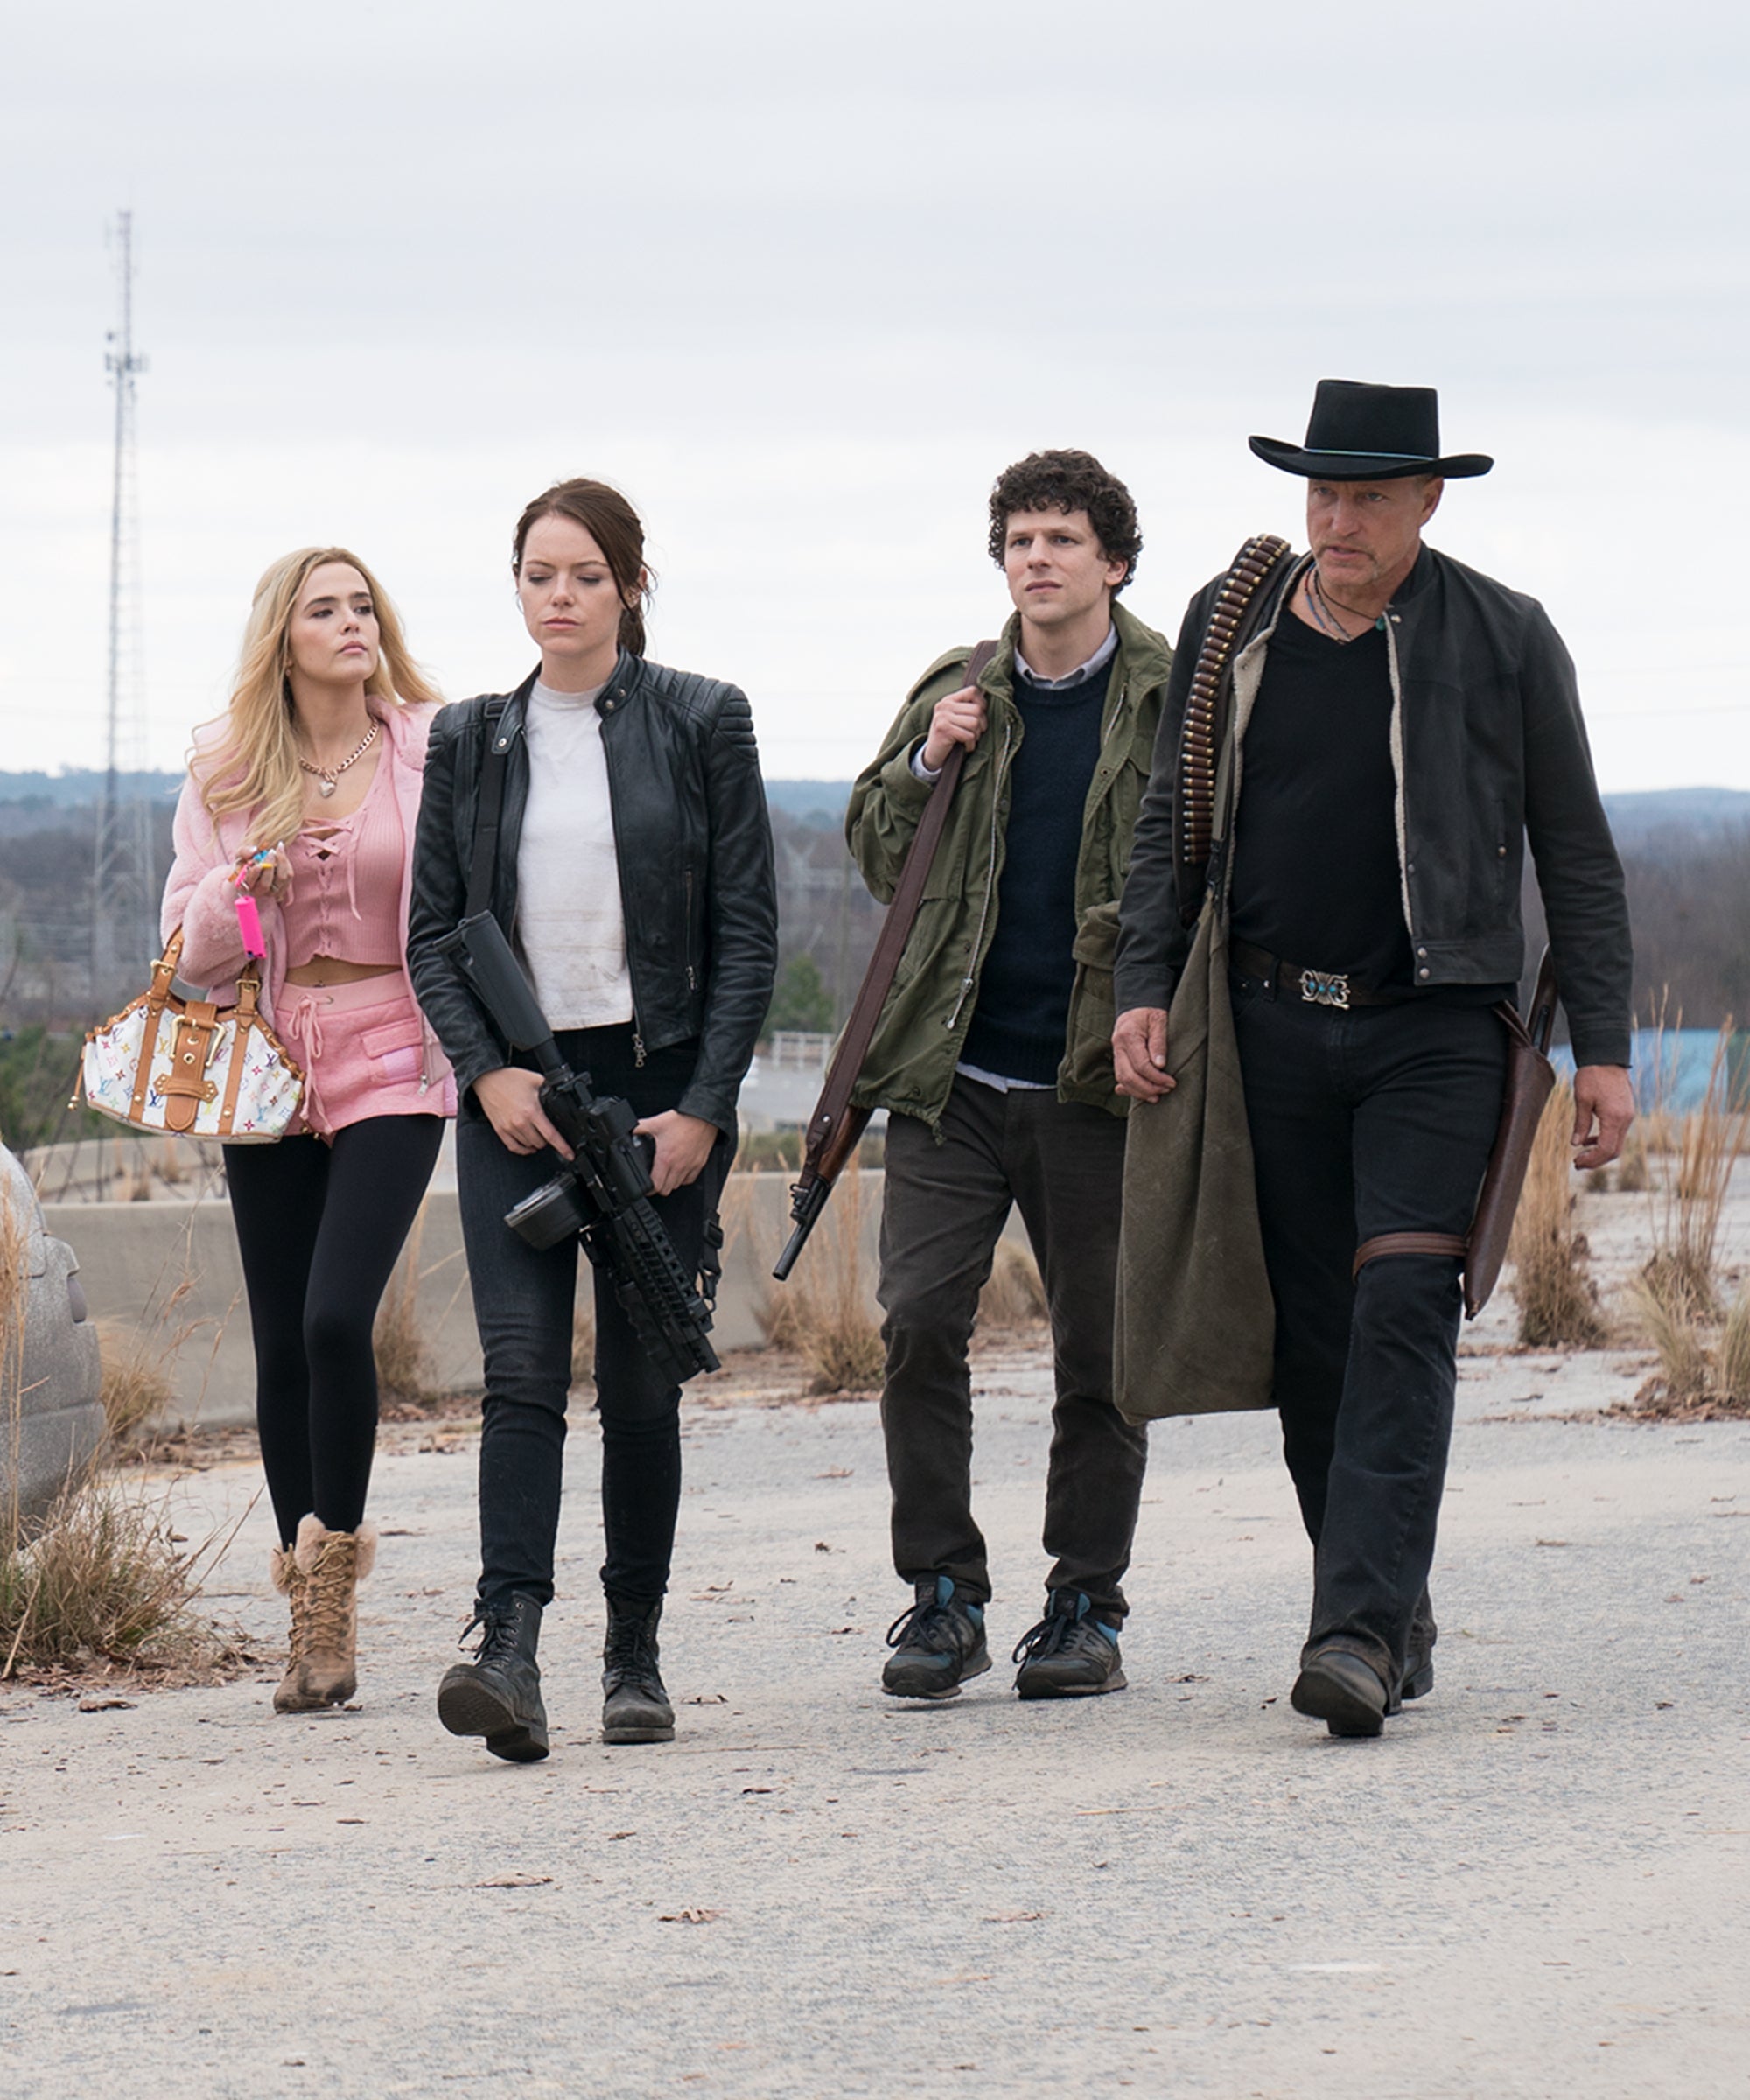 Movie Review - Zombieland - Road-Tripping Through The Apocalypse